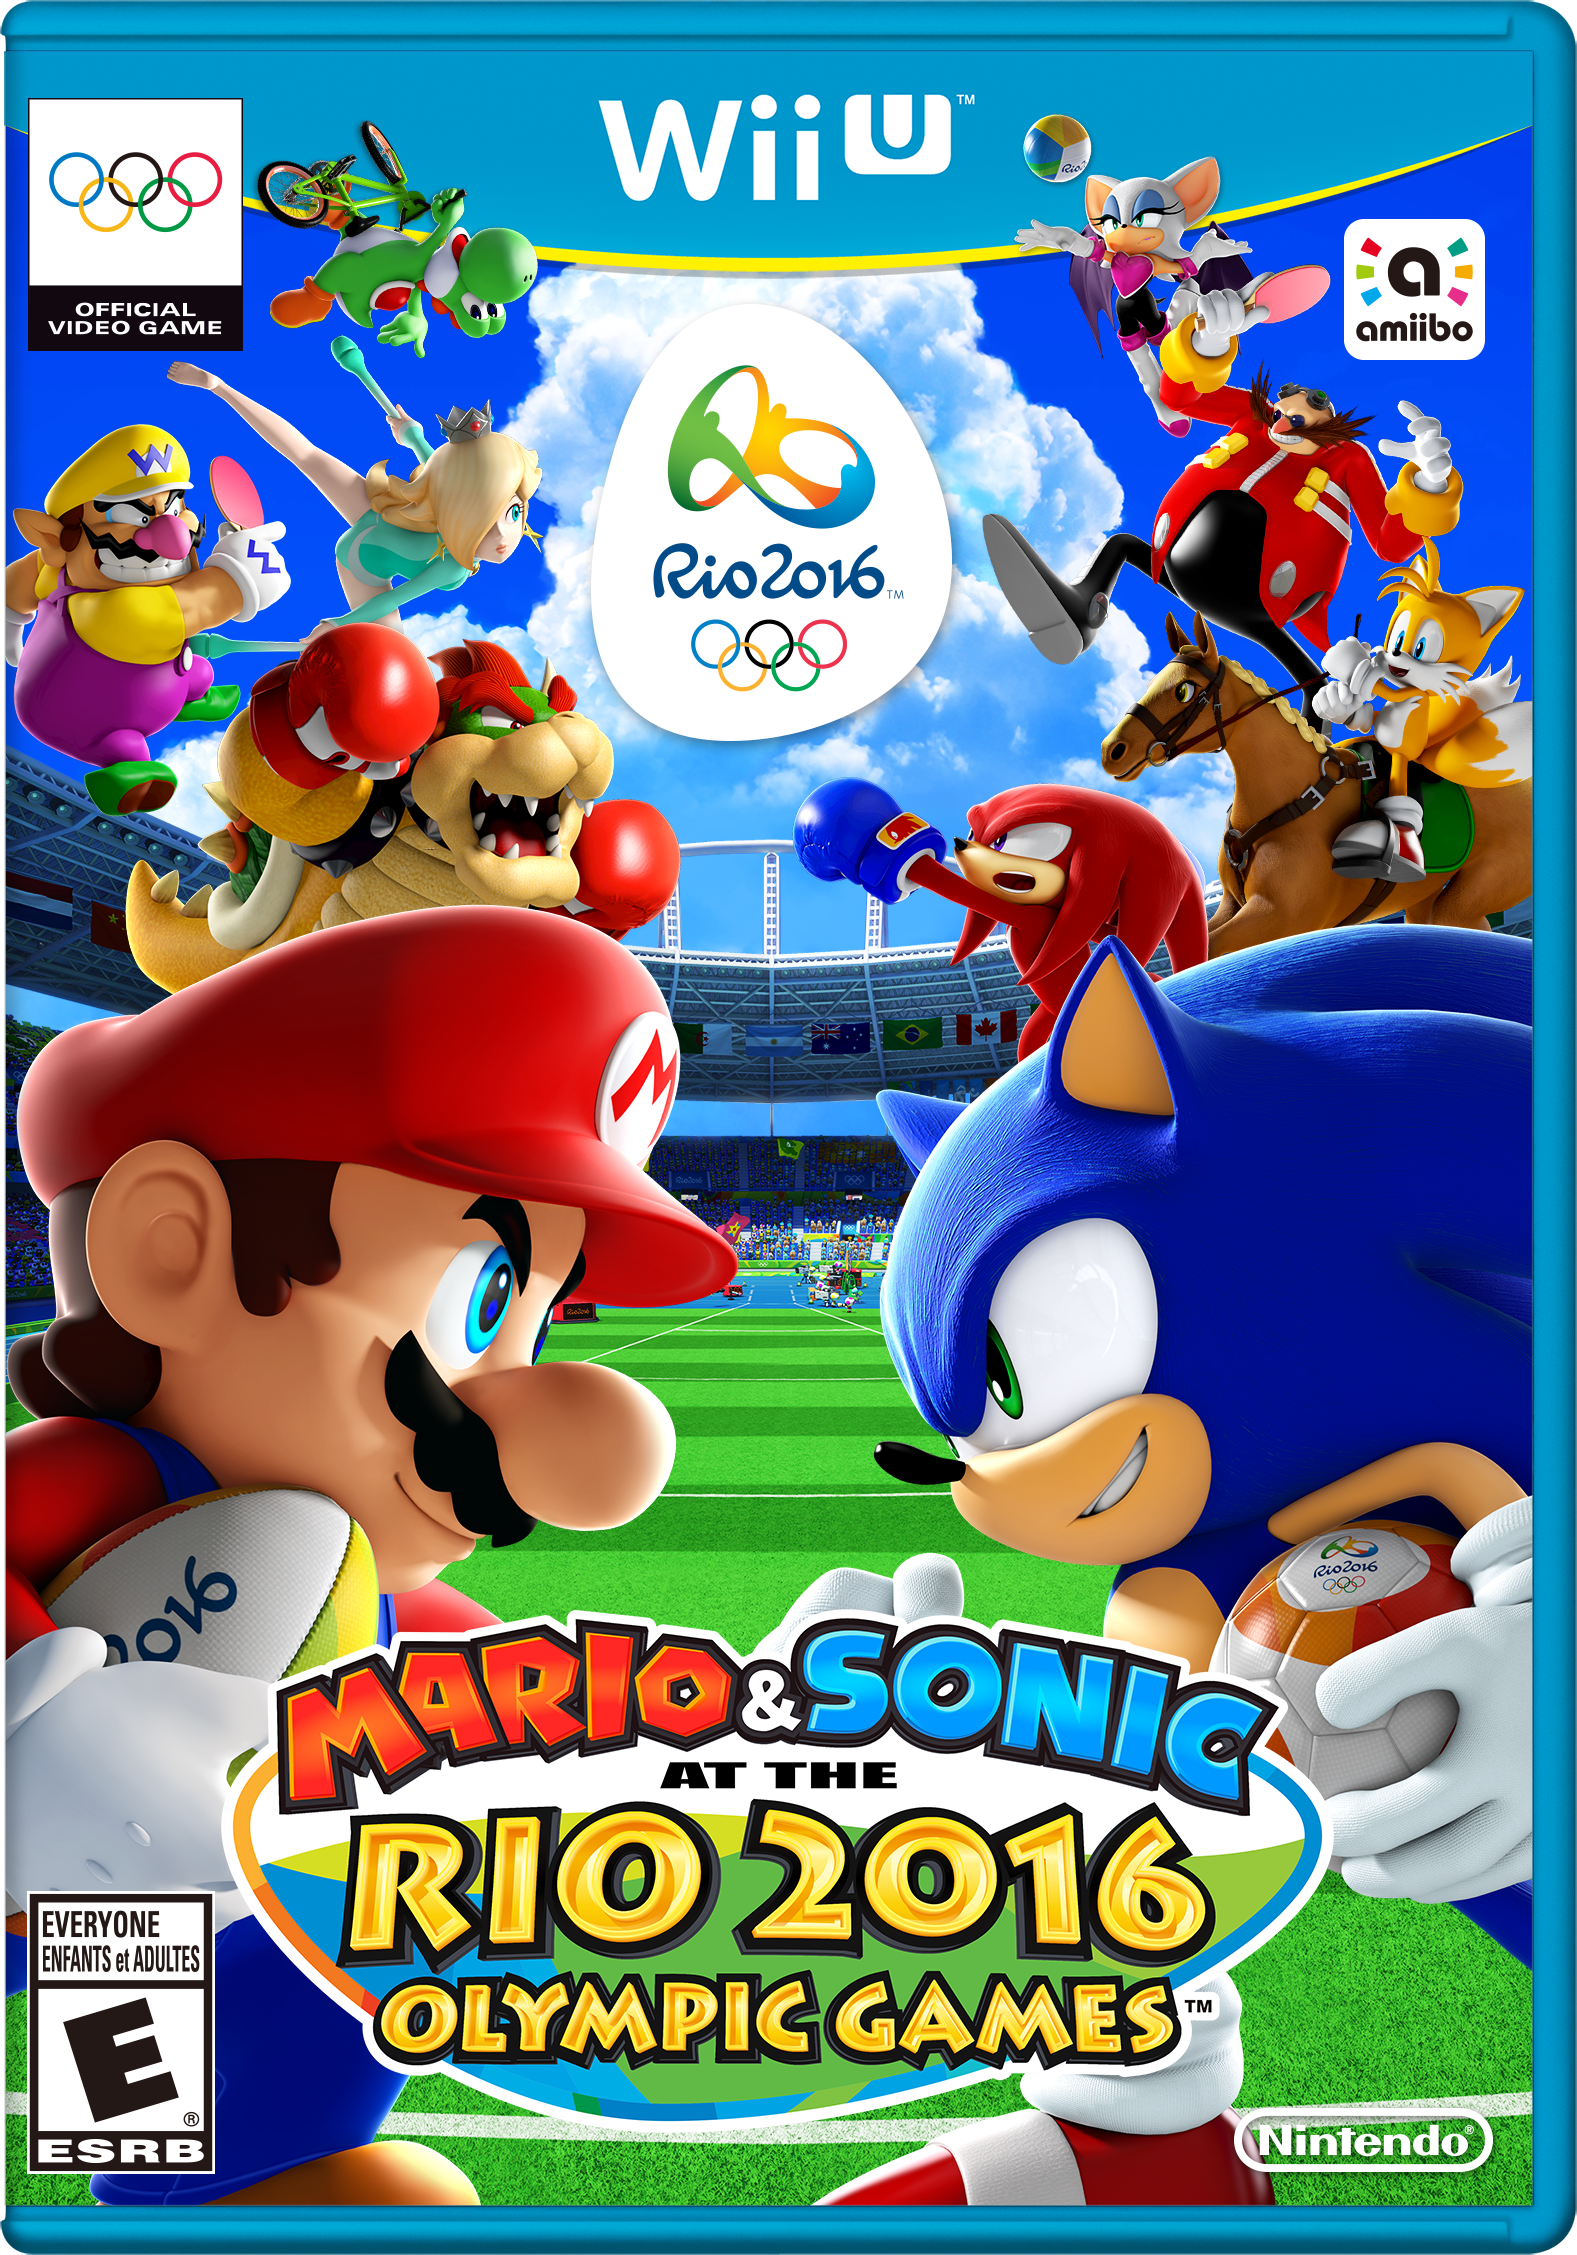 MSRio2016_OlympicGames_boxart.png